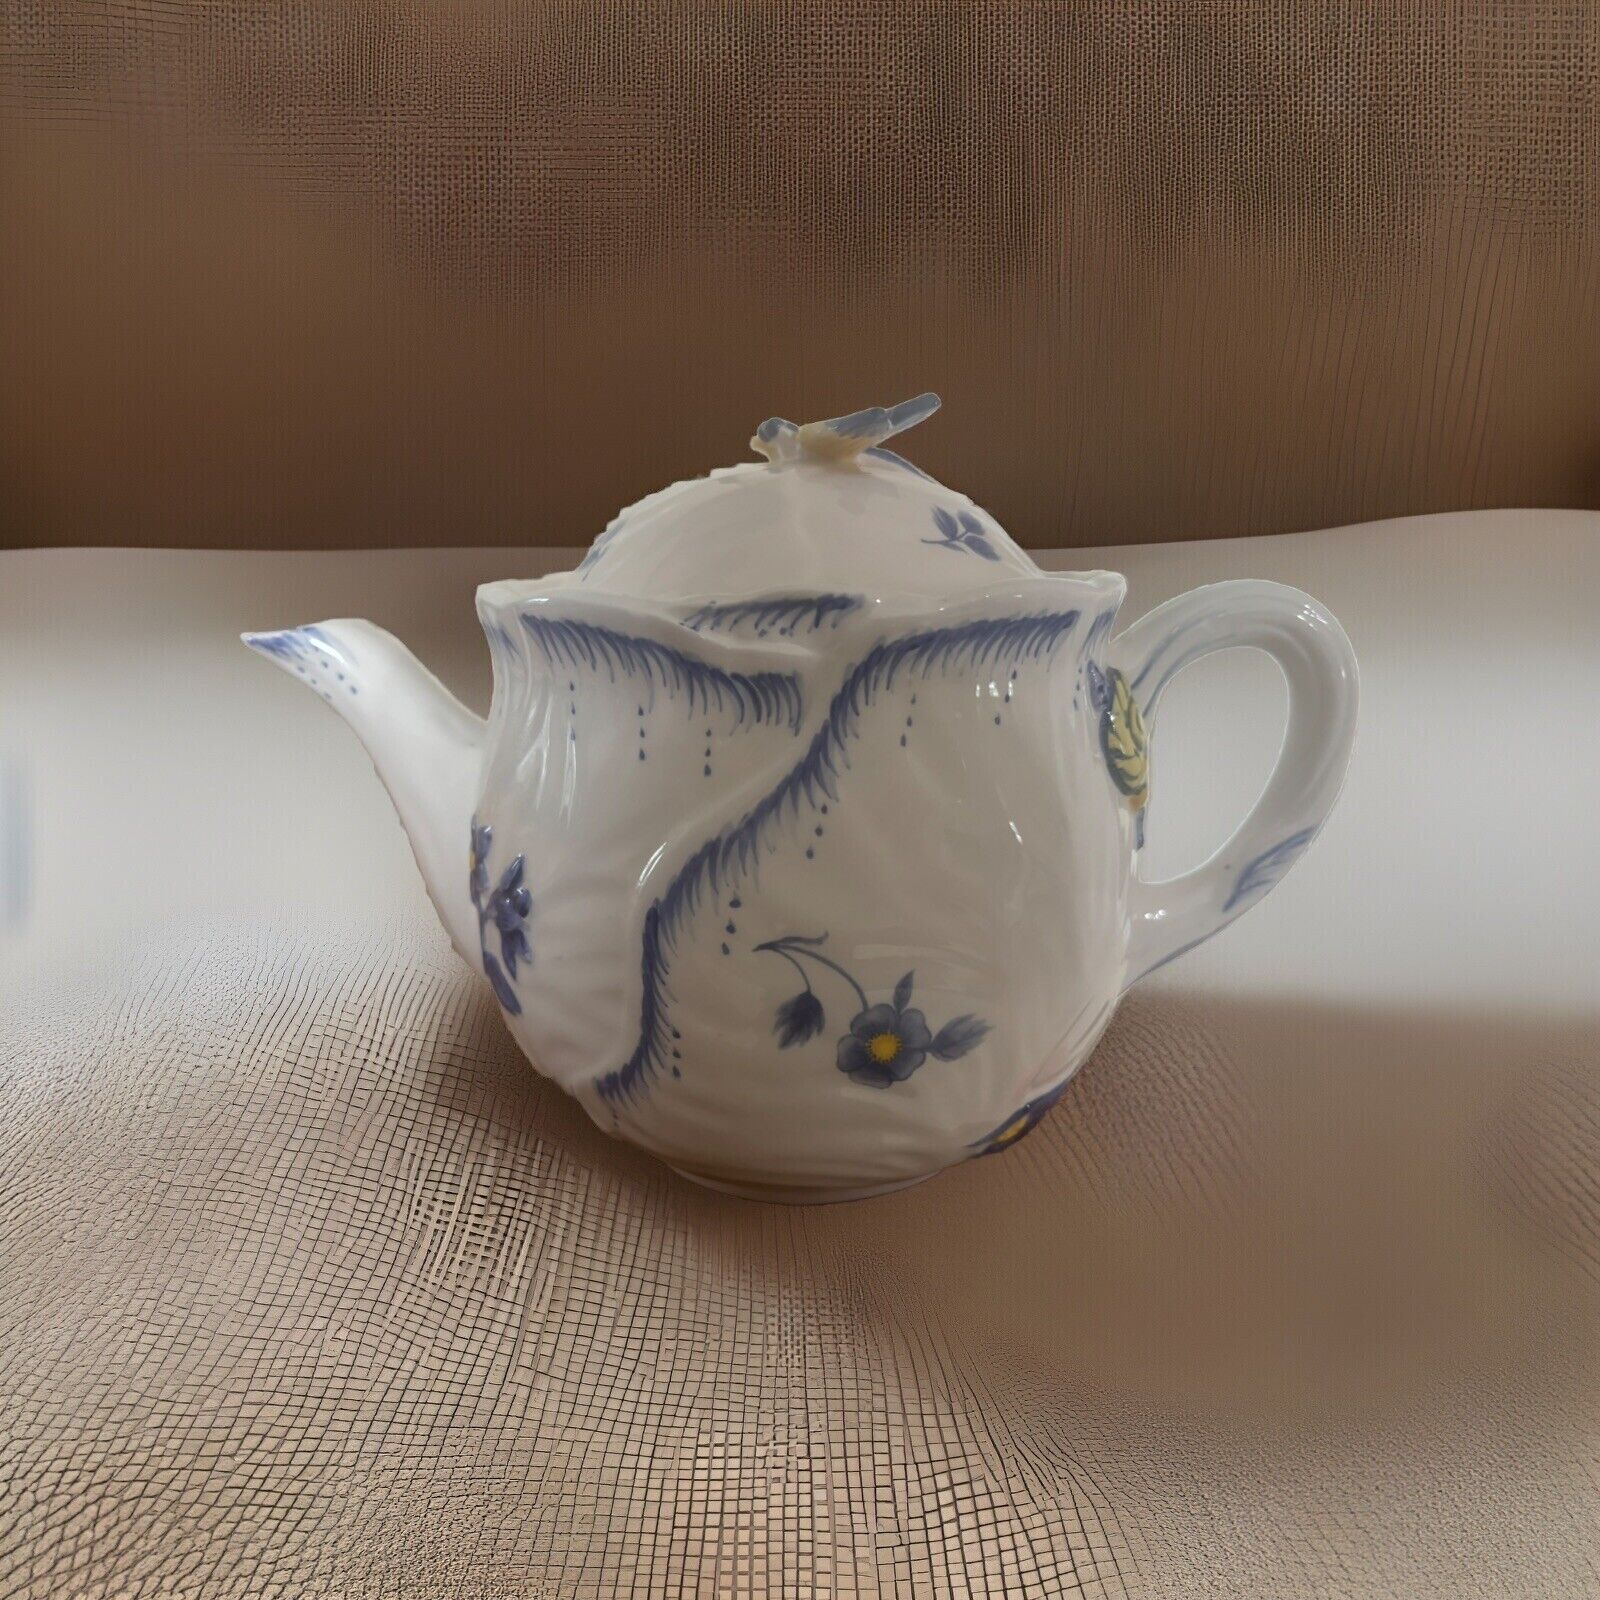 Spode Porcelain Teapot White with Blue Floral Accents and Dragonfly atop